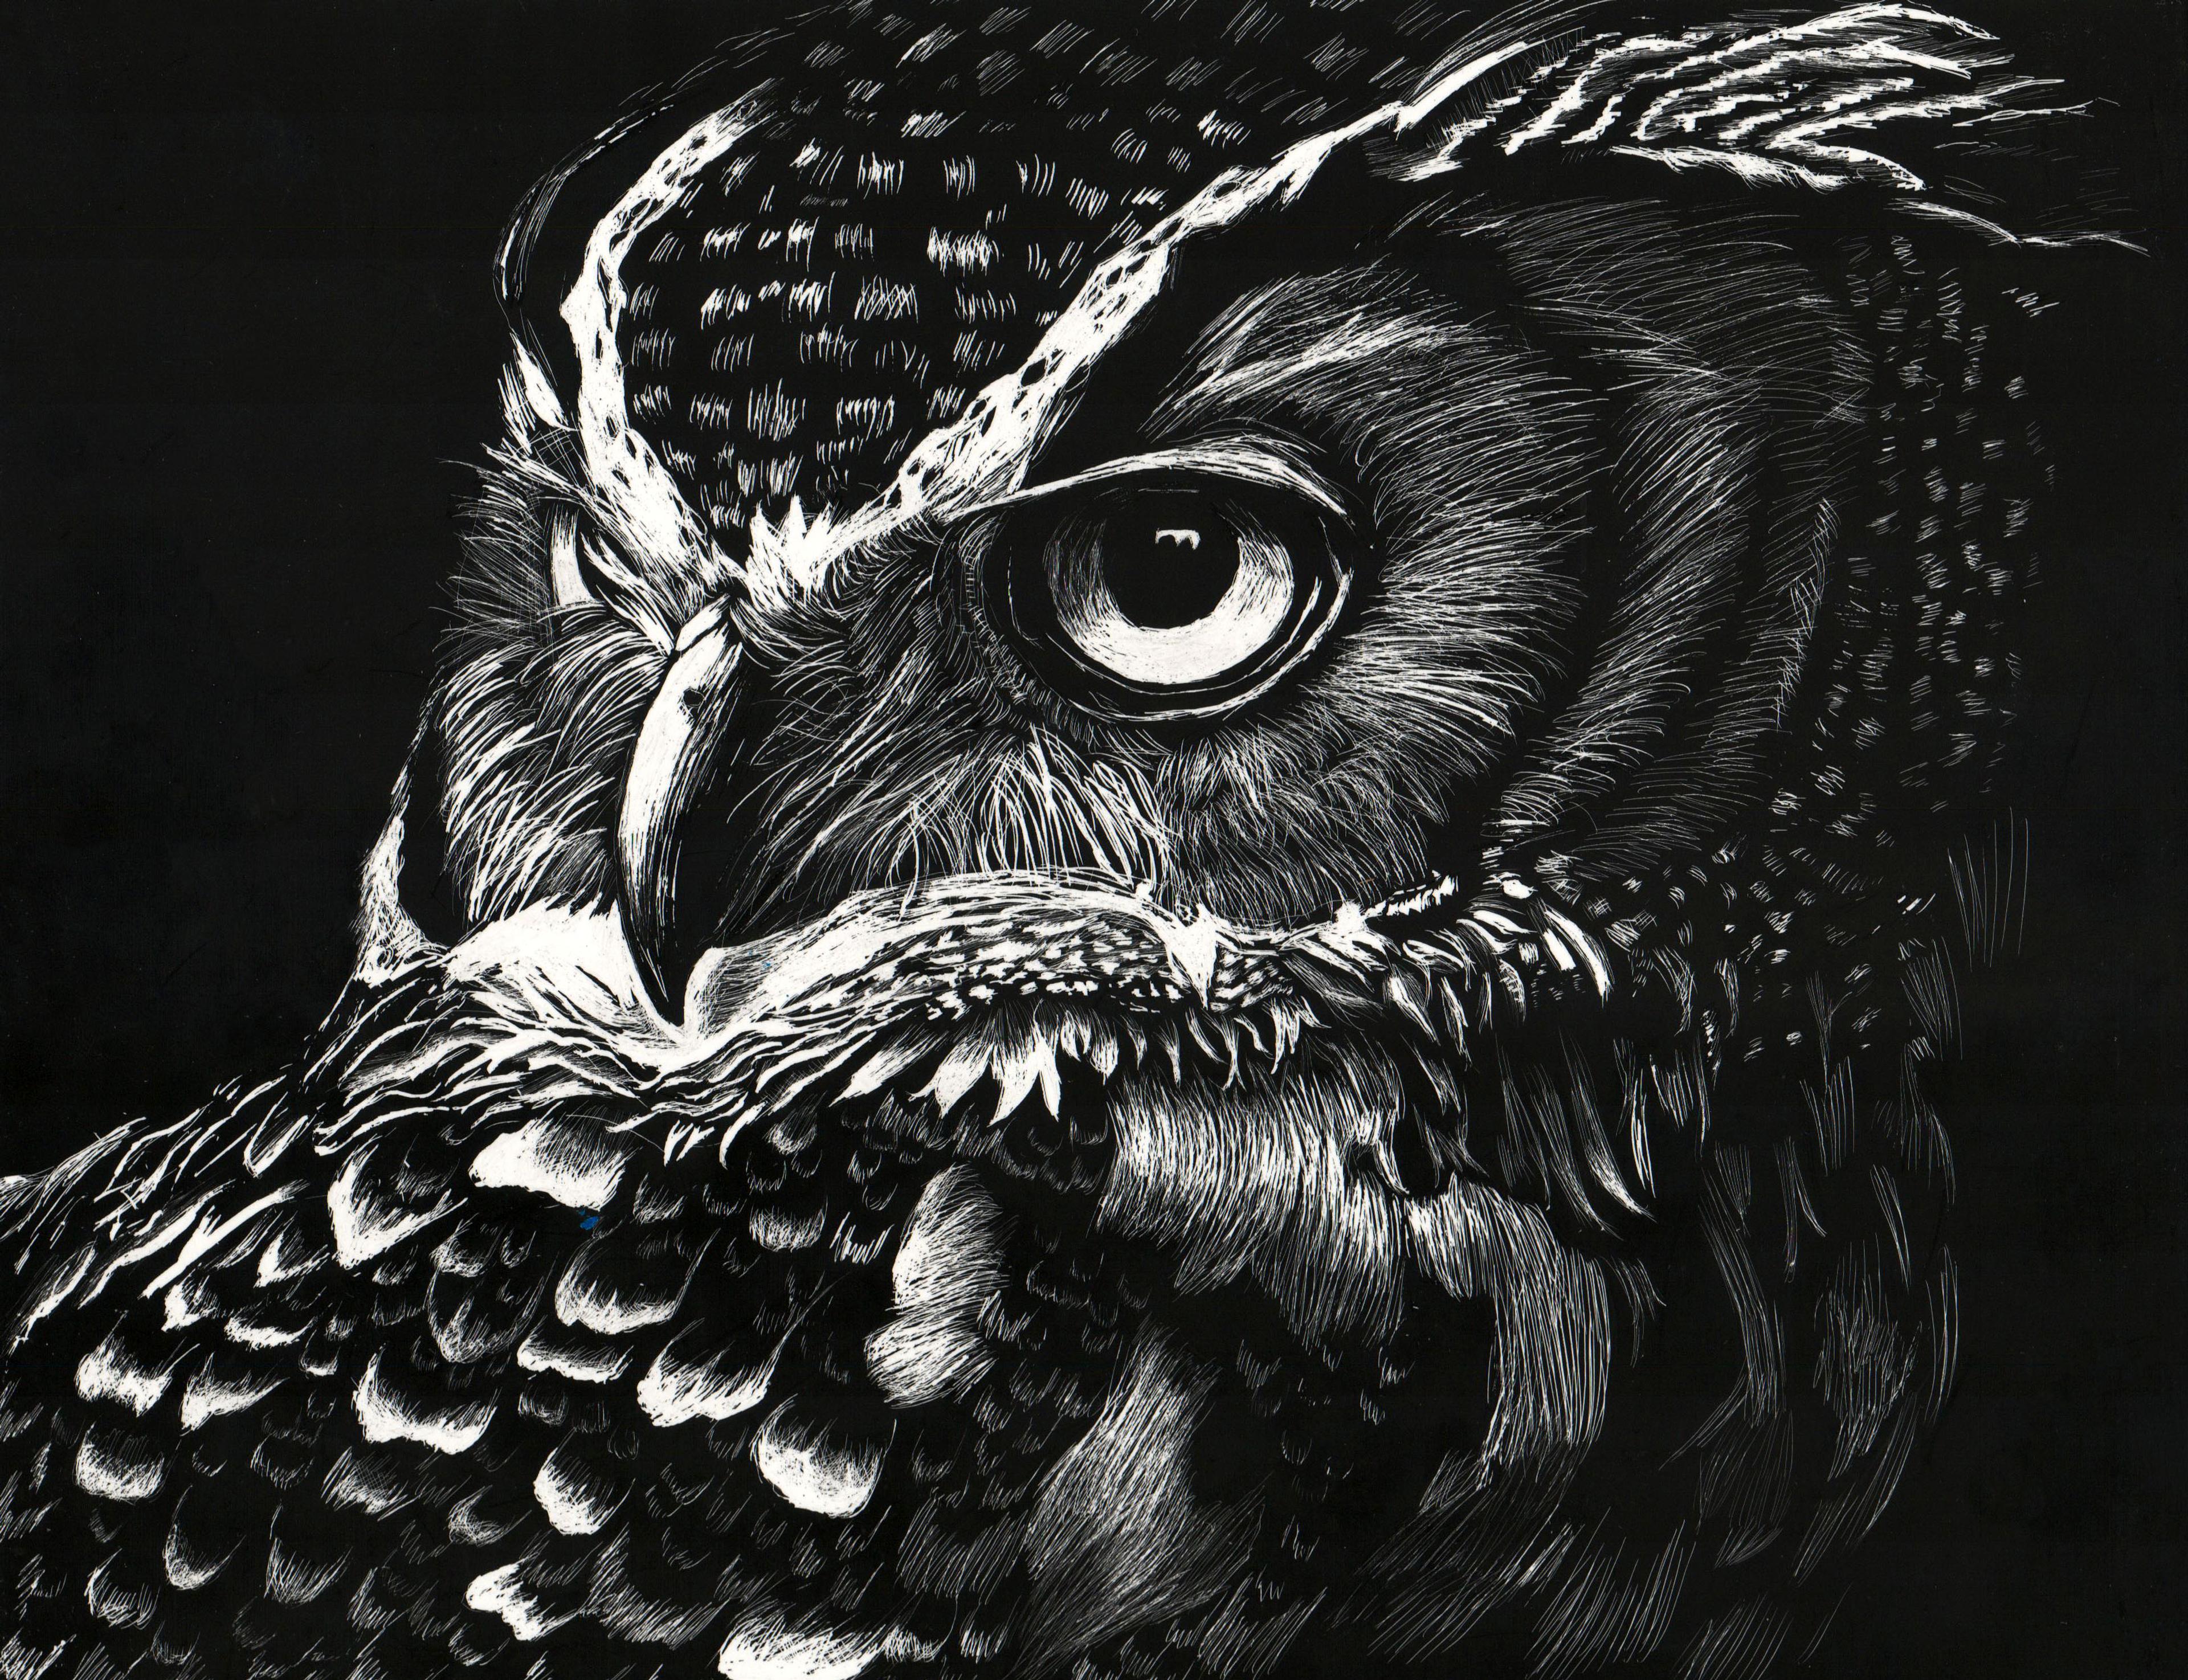 Black-and-white close-up portrait of the face of a dark feathered owl facing left, created on scratchboard. The owl and its many feathers are drawn in dramatic, detailed contrast against a black background. The owl's large, round, left eye is nearly in the center of the composition, with its right eye almost completely out of view.